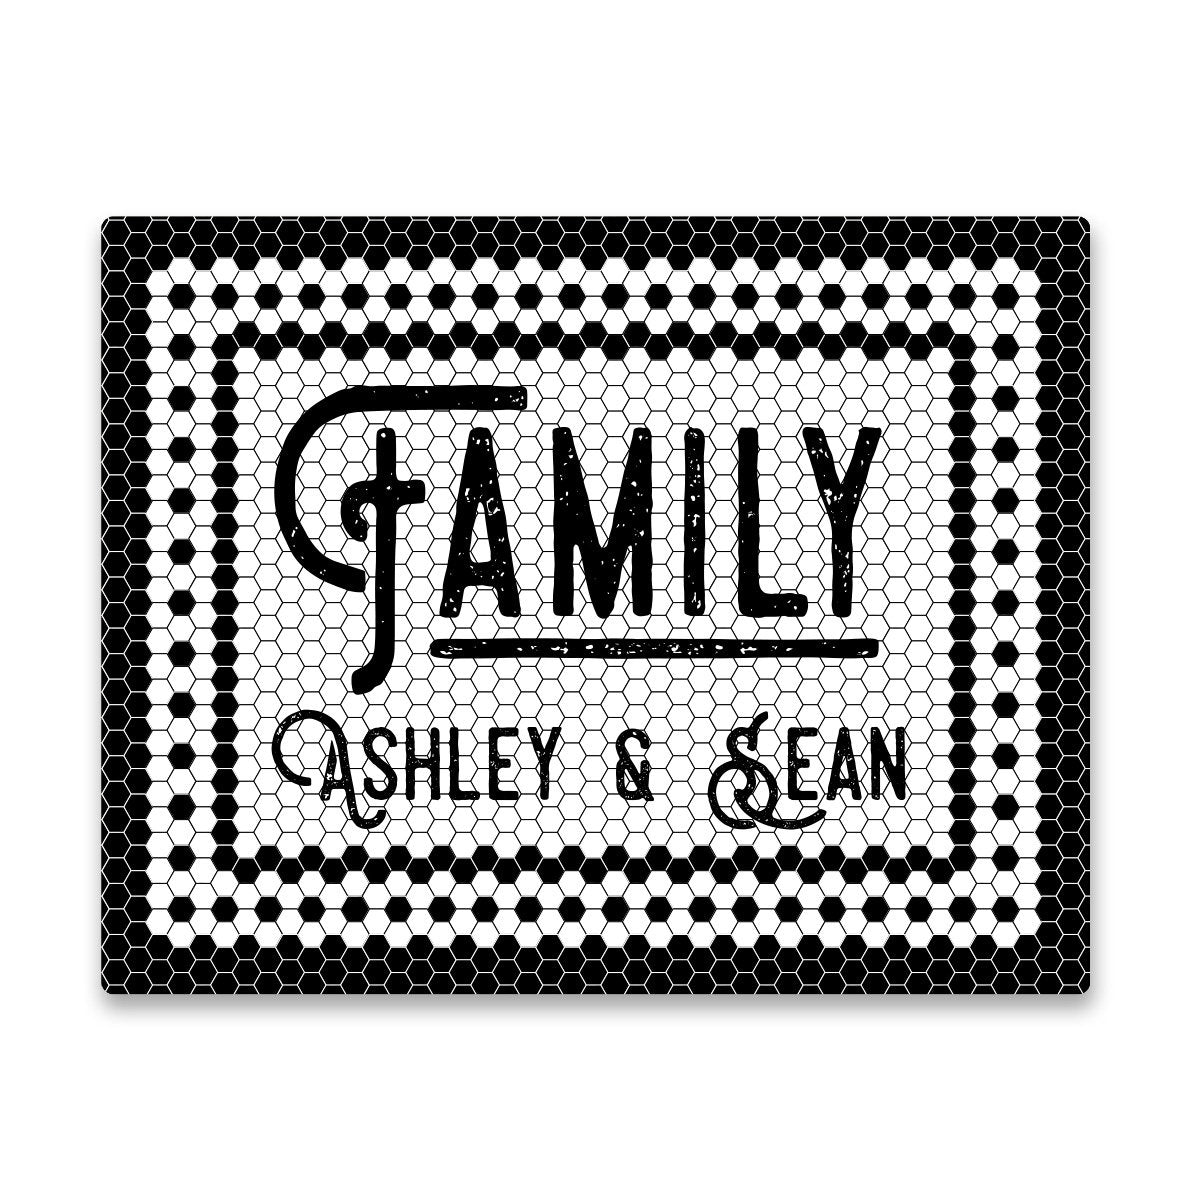 Personalized Family Black and White Mosaic Tile Look Wall Art